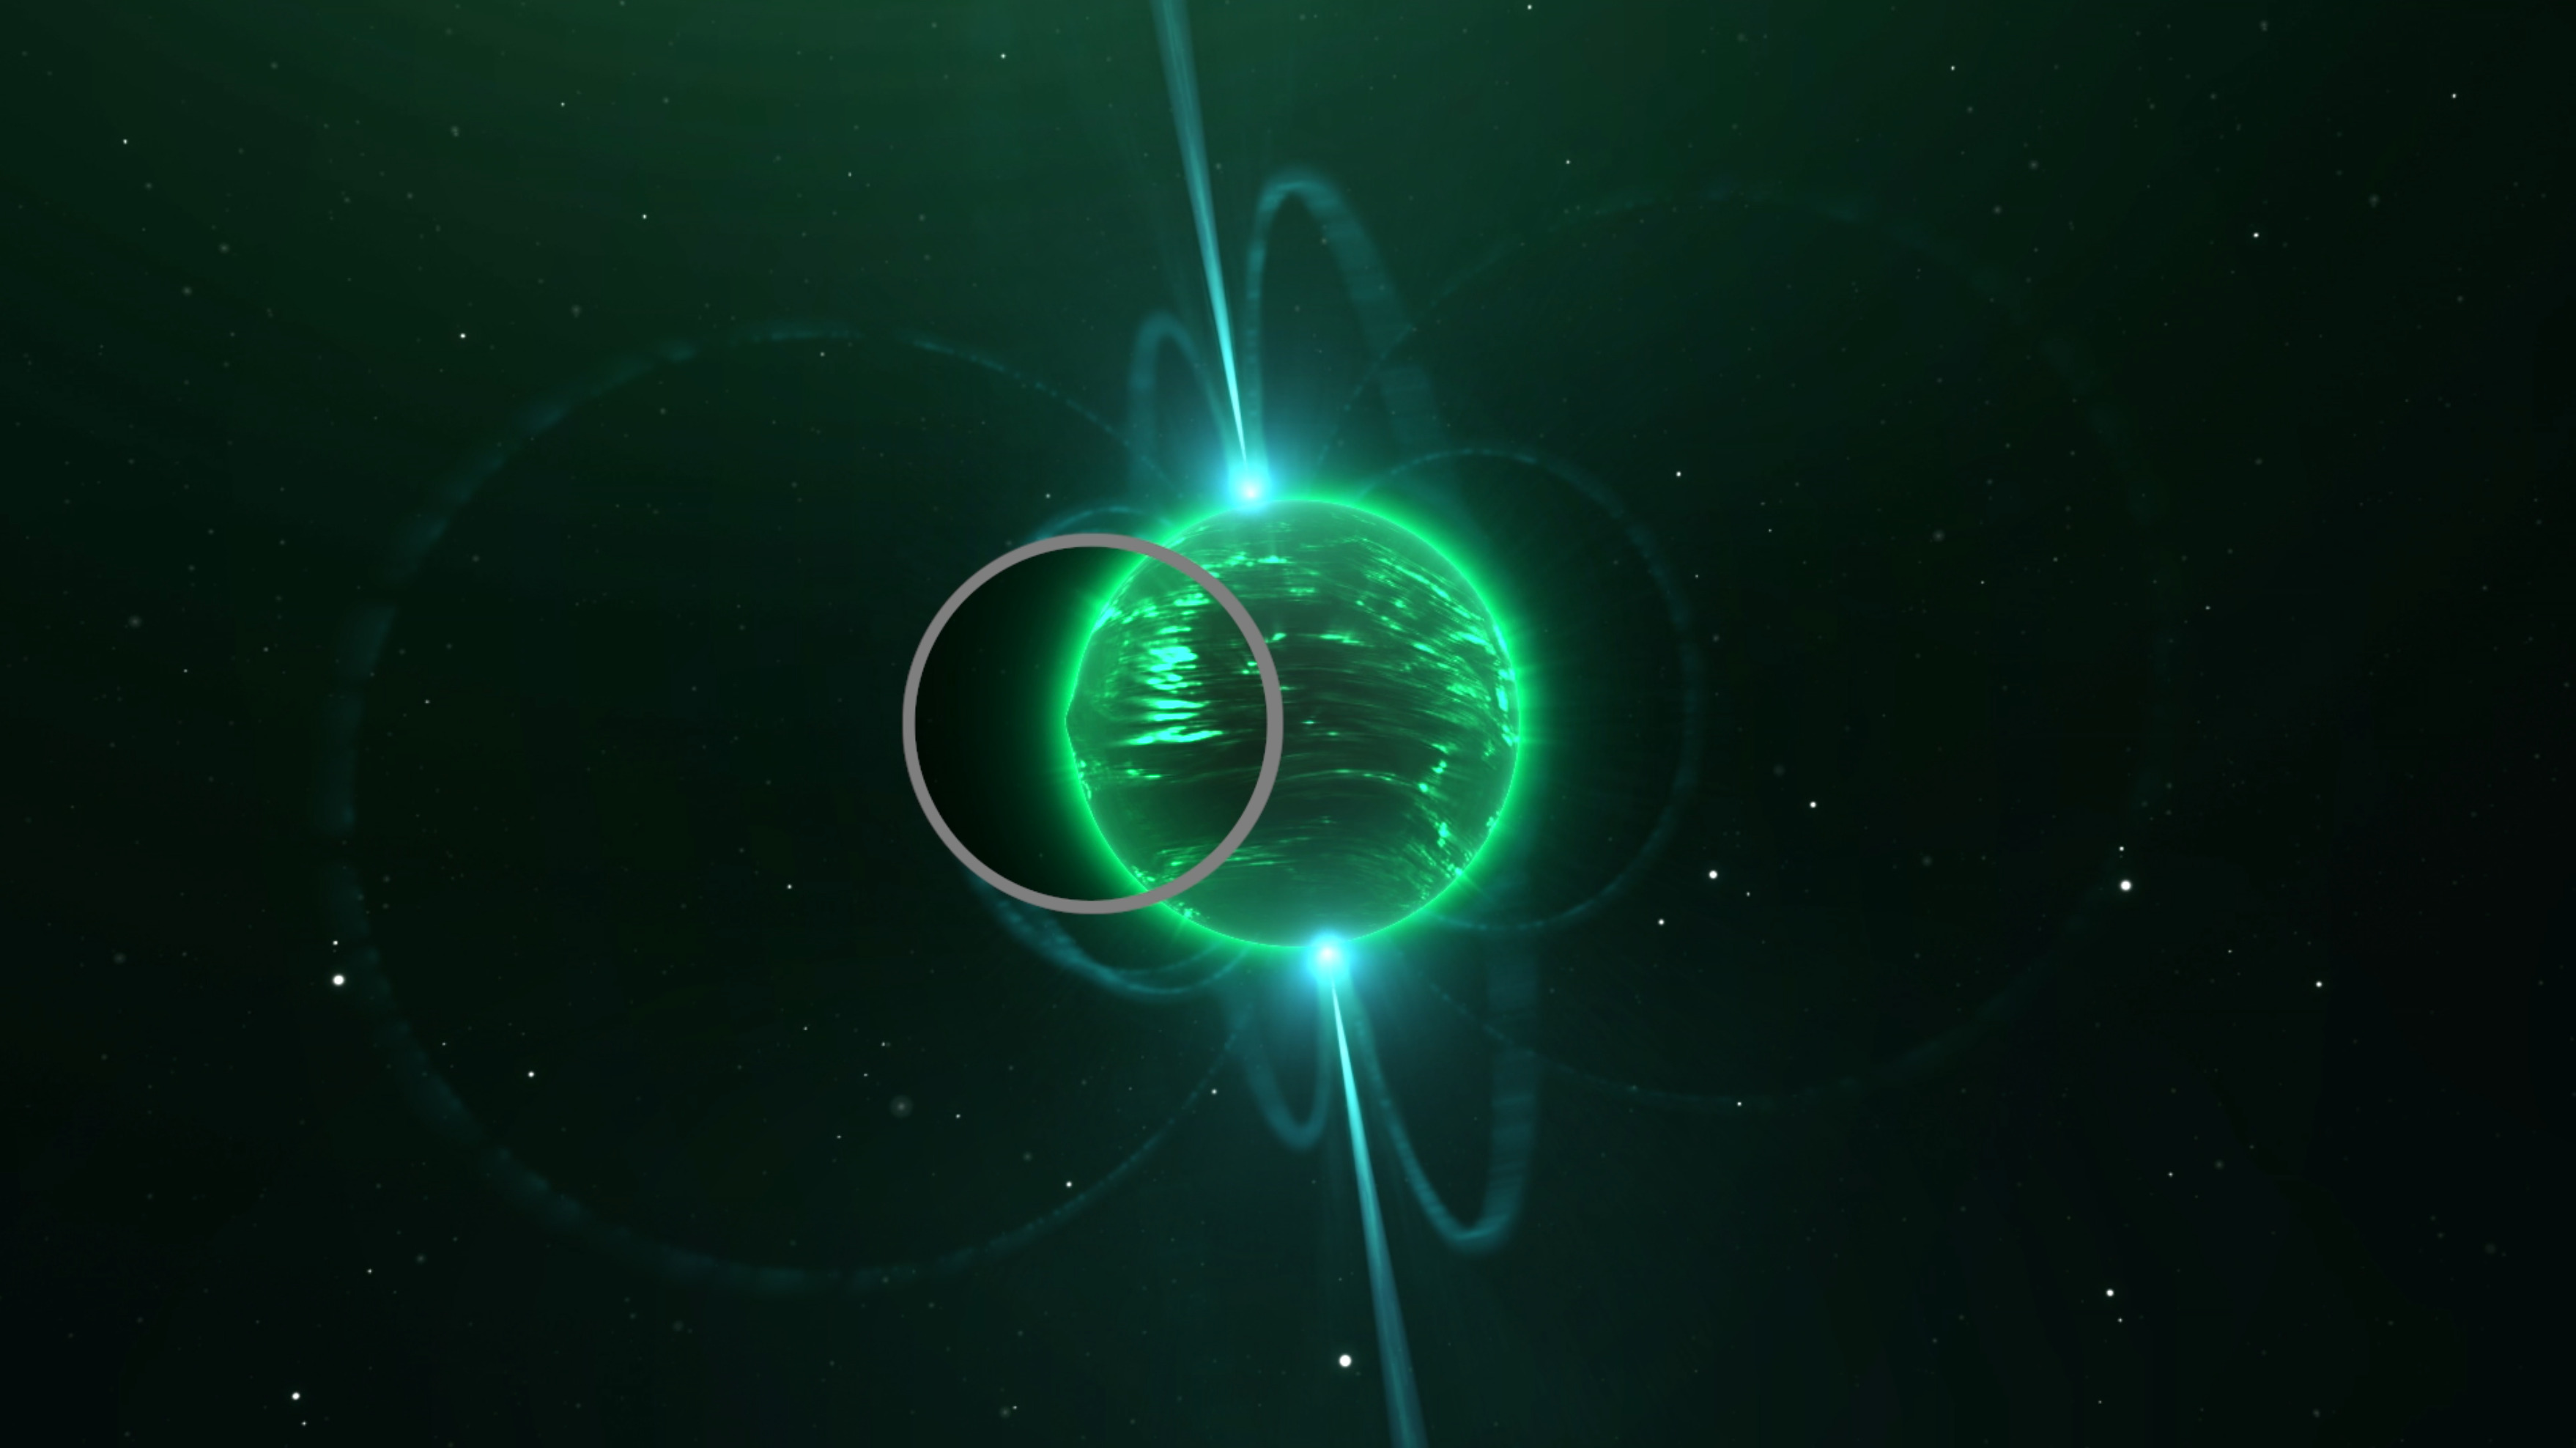 Artist's impression of a deformed neutron star featuring a tiny bump on its equator. Credit: M.A. Papa/MPI for Gravitational Physics/Milde Marketing